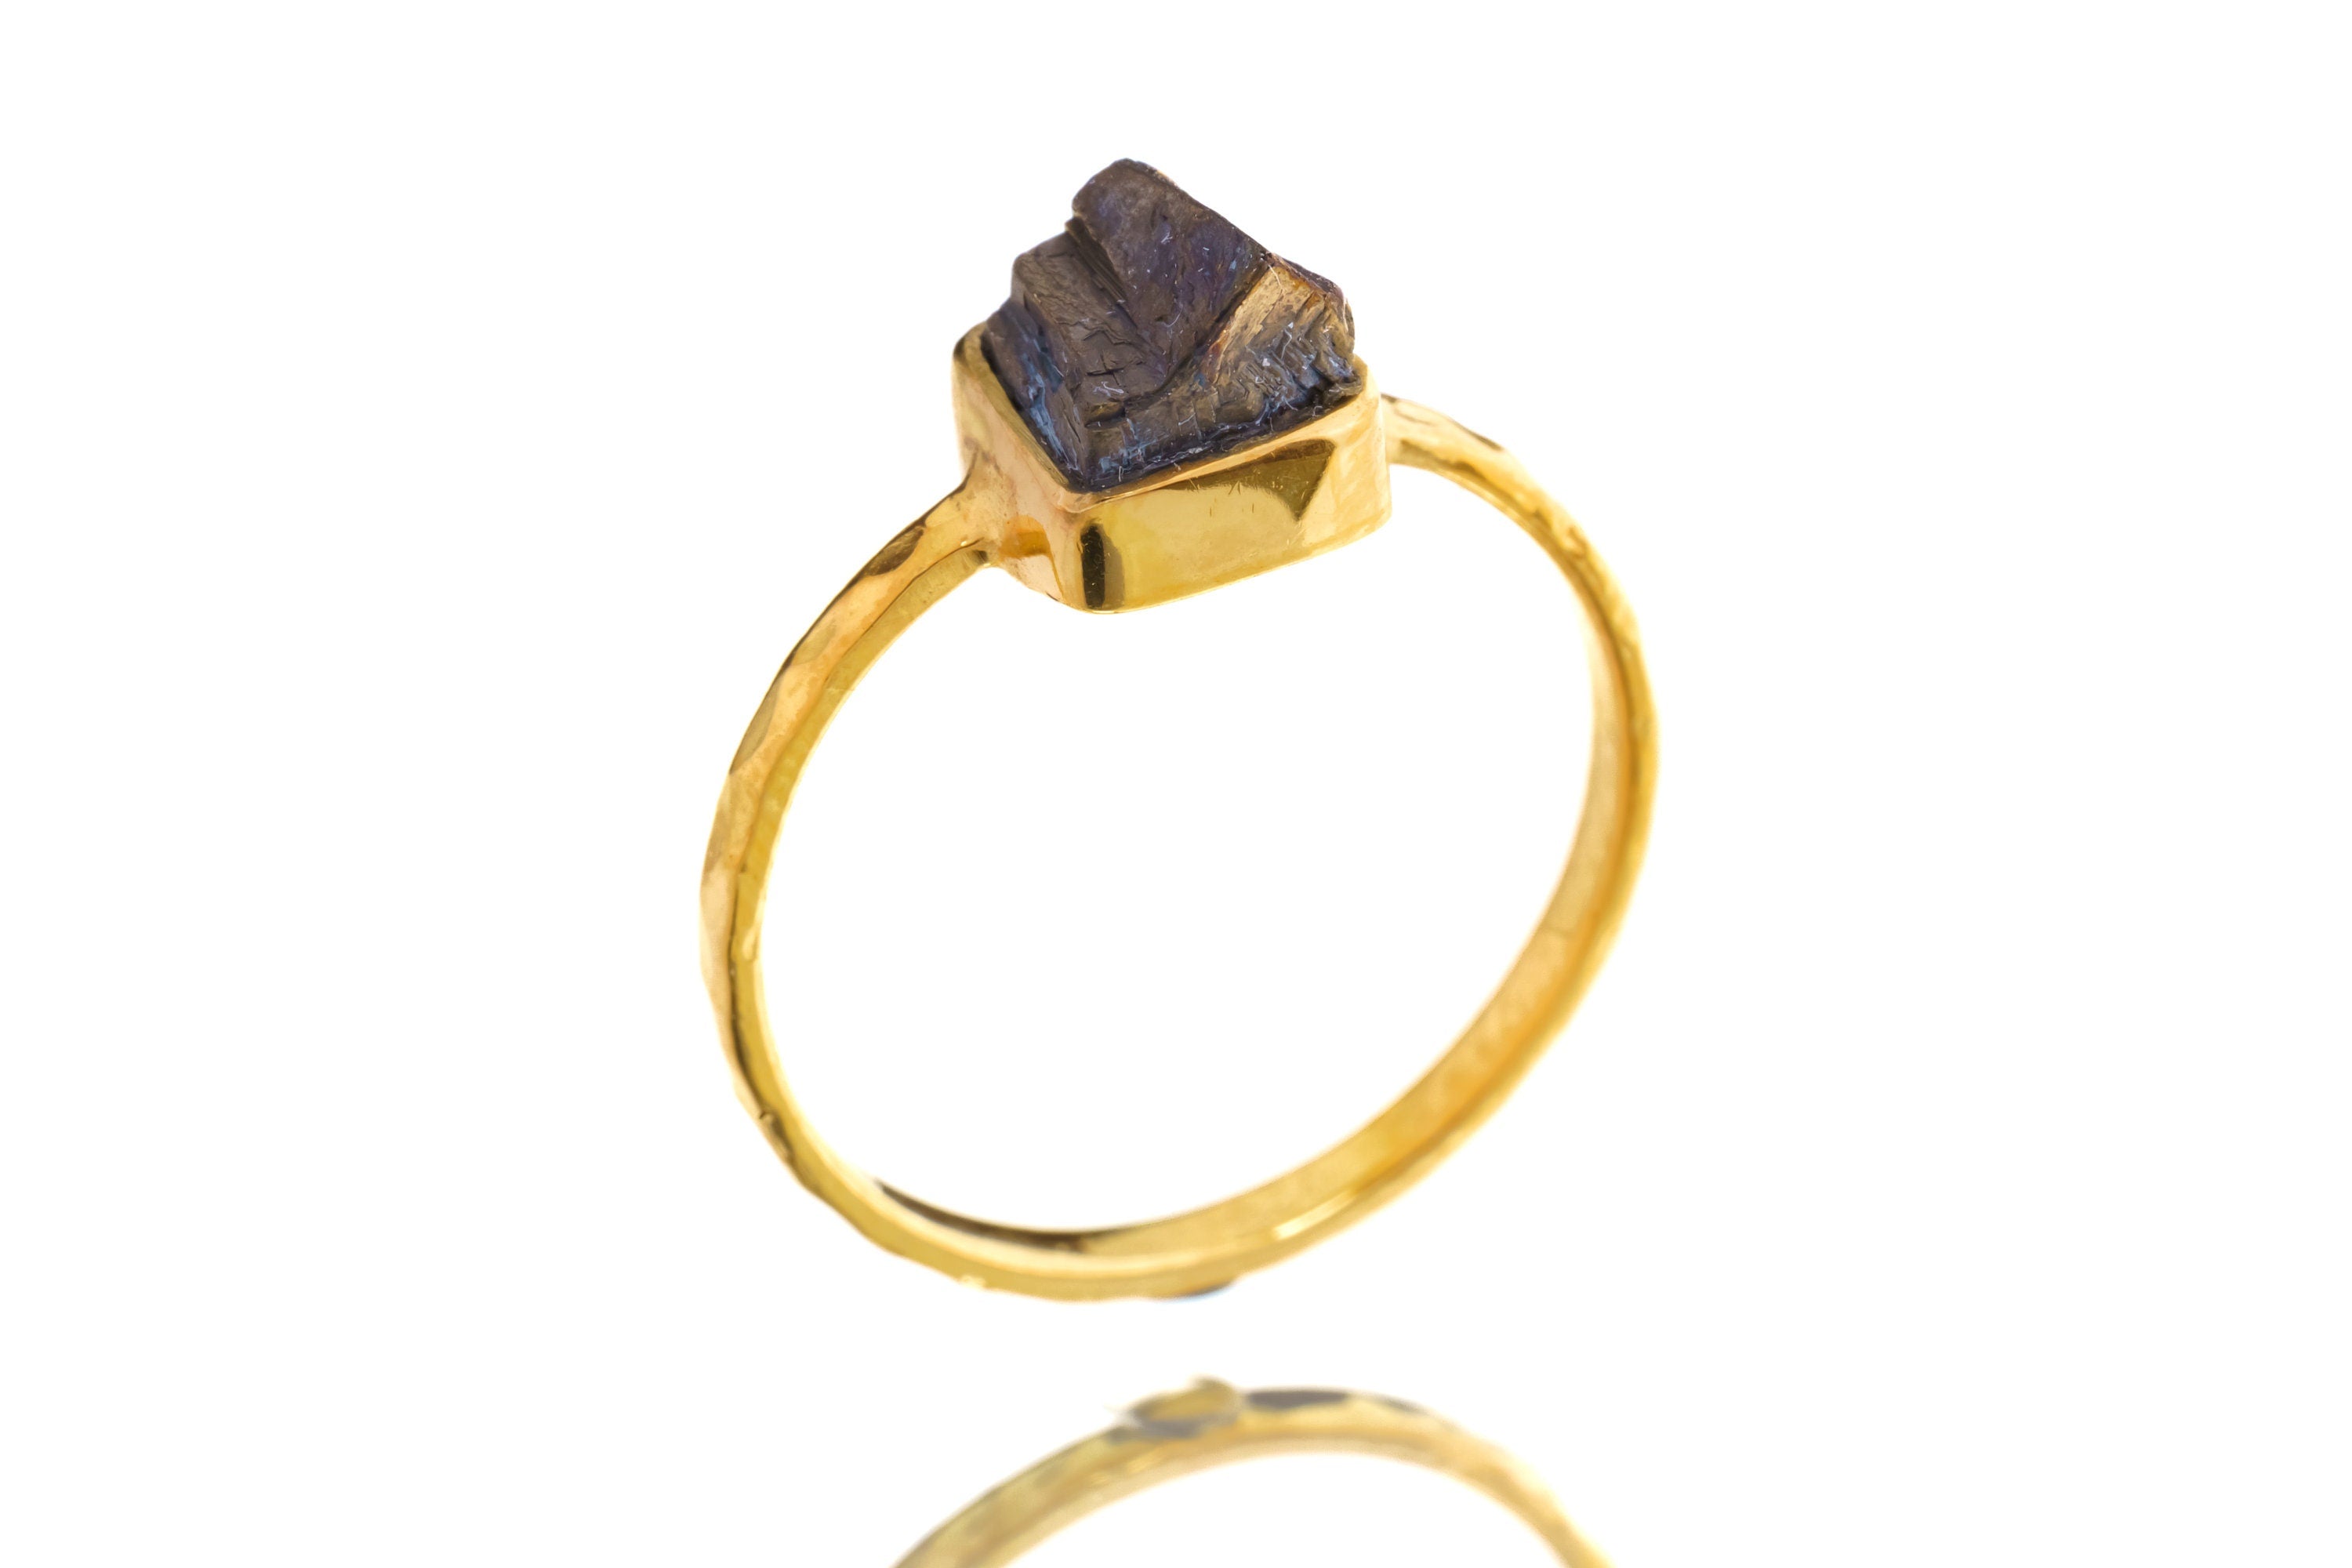 Gold Kissed Australian Cubic Pyrite - Stack Crystal Ring - Size 5 1/2 US - Gold Plated 925 Sterling Silver - Thin Band Hammer Textured